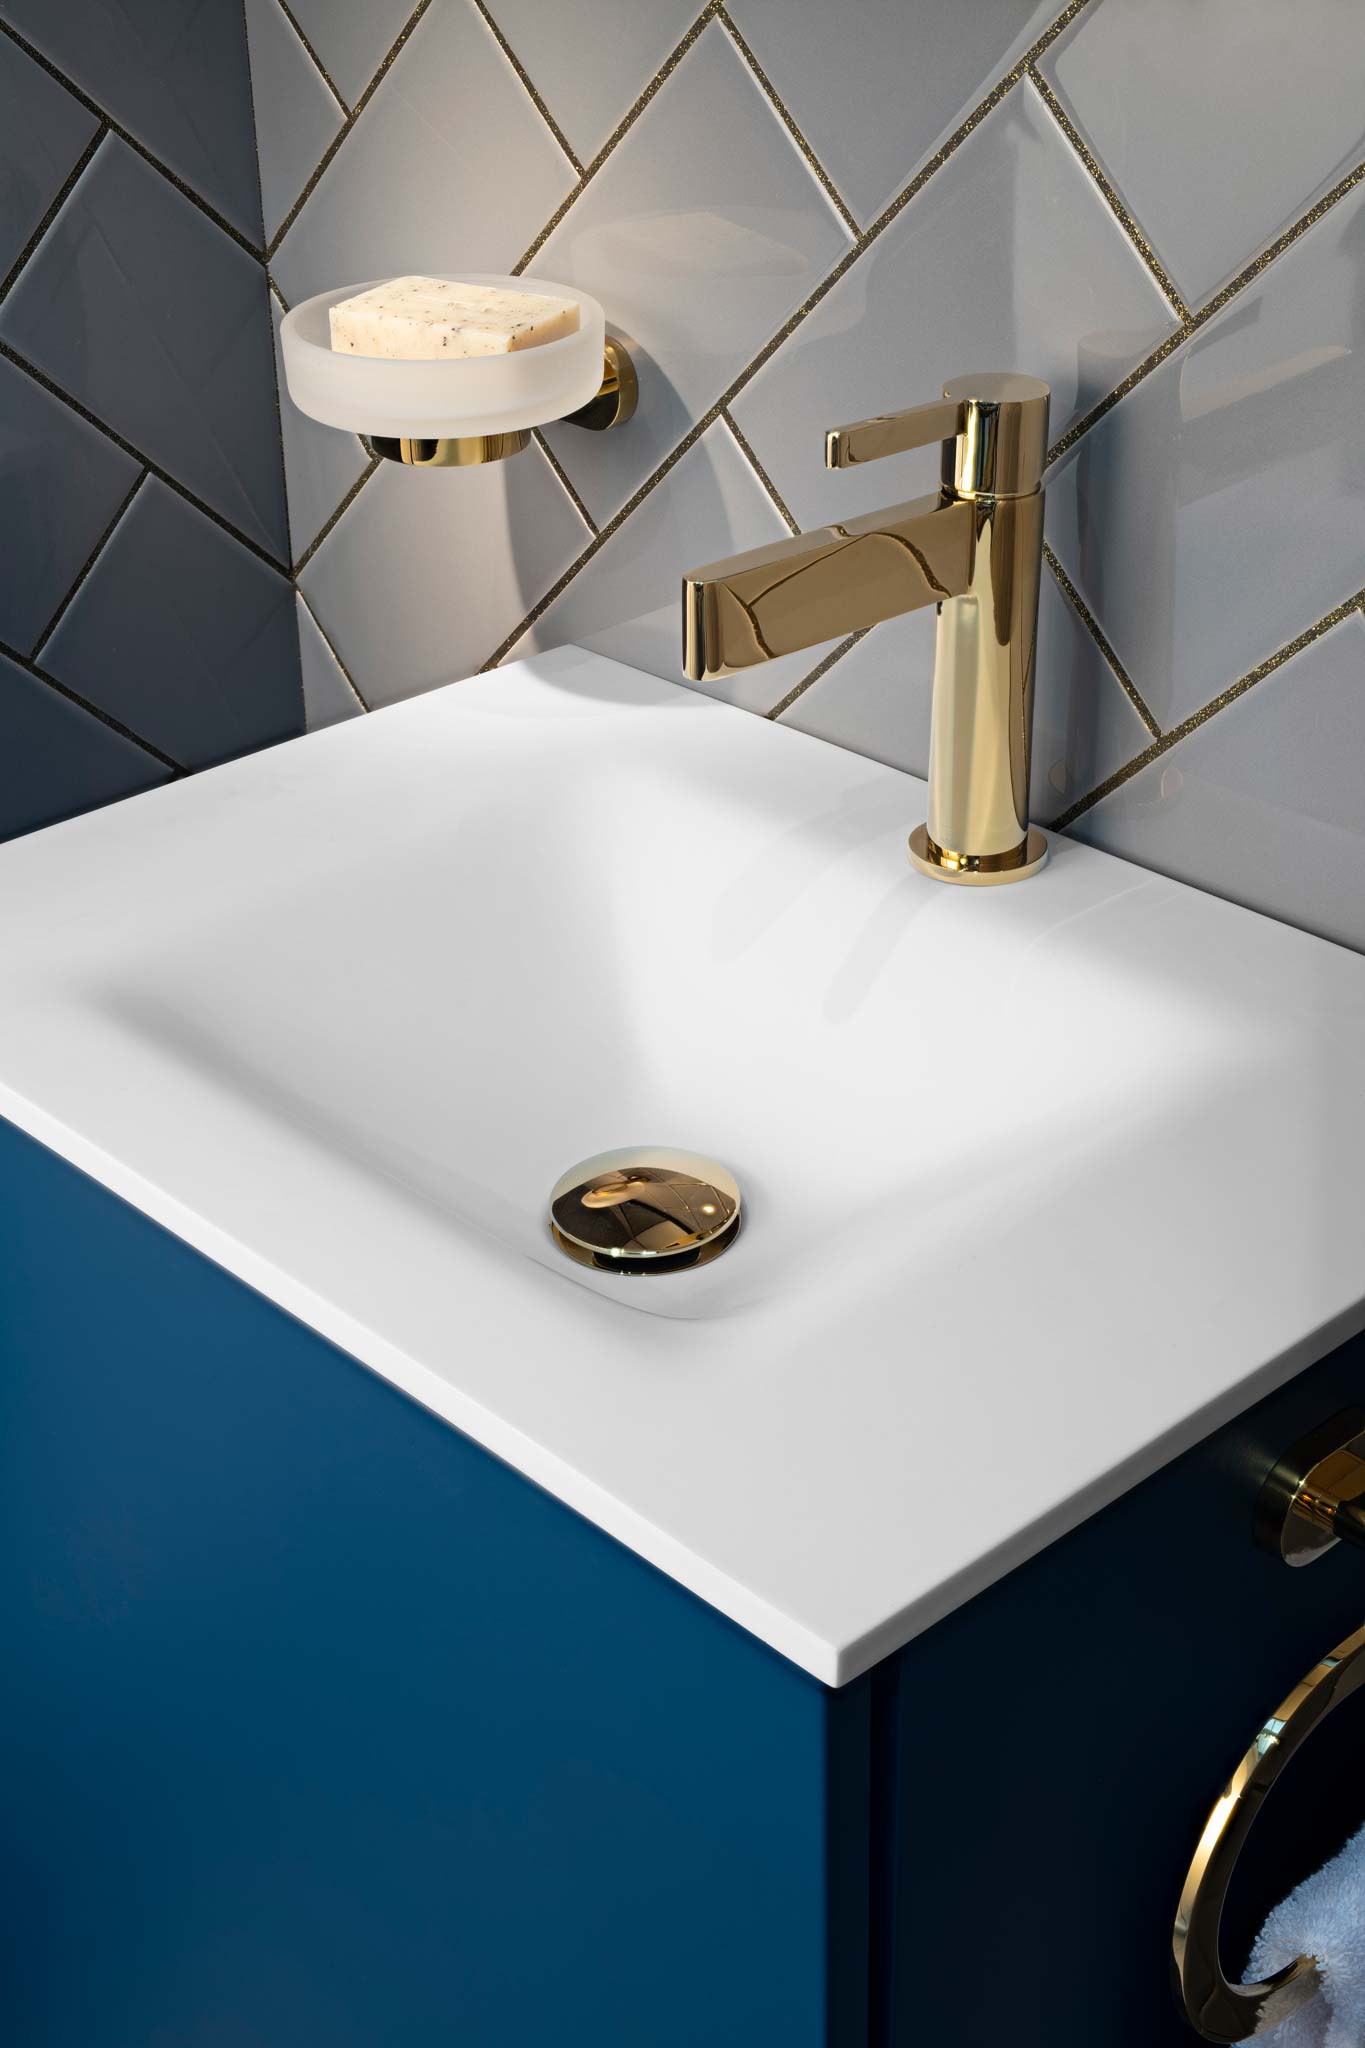 Location photography of bathroom brassware, mixer and accessories display